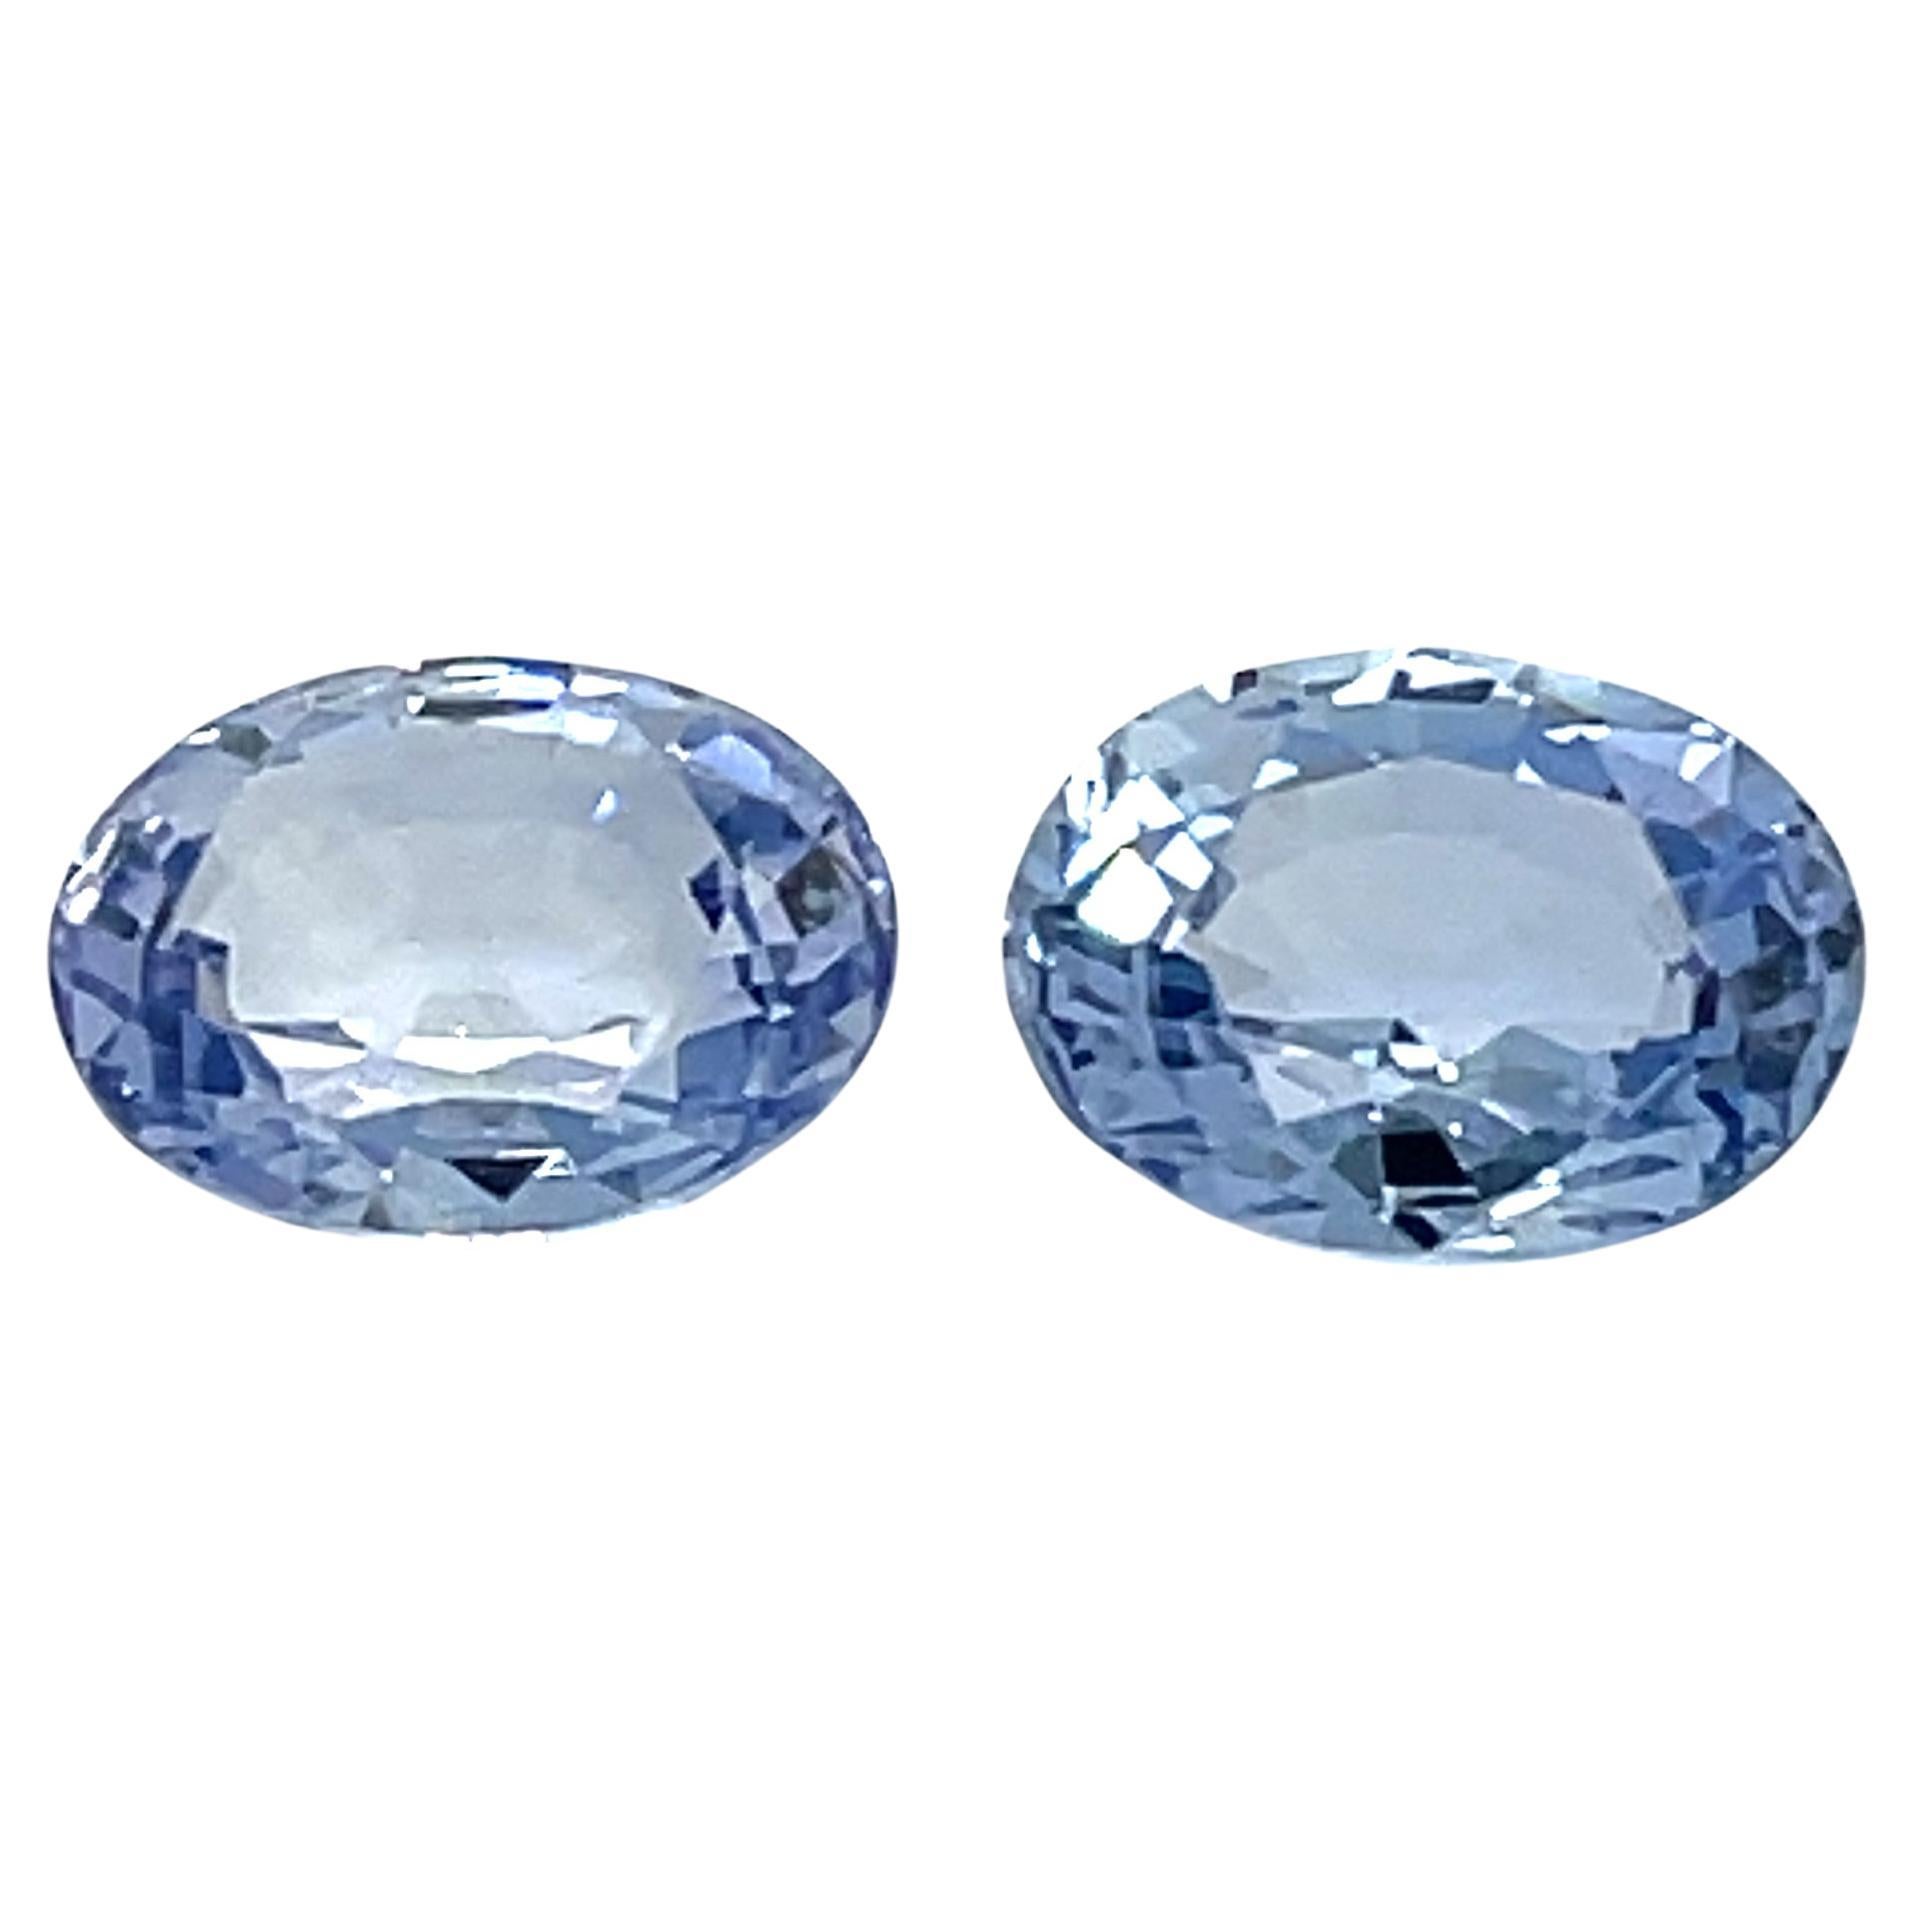 Take a trip through luxury with these magnificent oval faceted blue sapphires, weighing 4.37 carats and gleaming with unmatched brilliance. 

What sets these gems apart? They are ethically sourced and certified as 'No Heat,' ensuring their natural